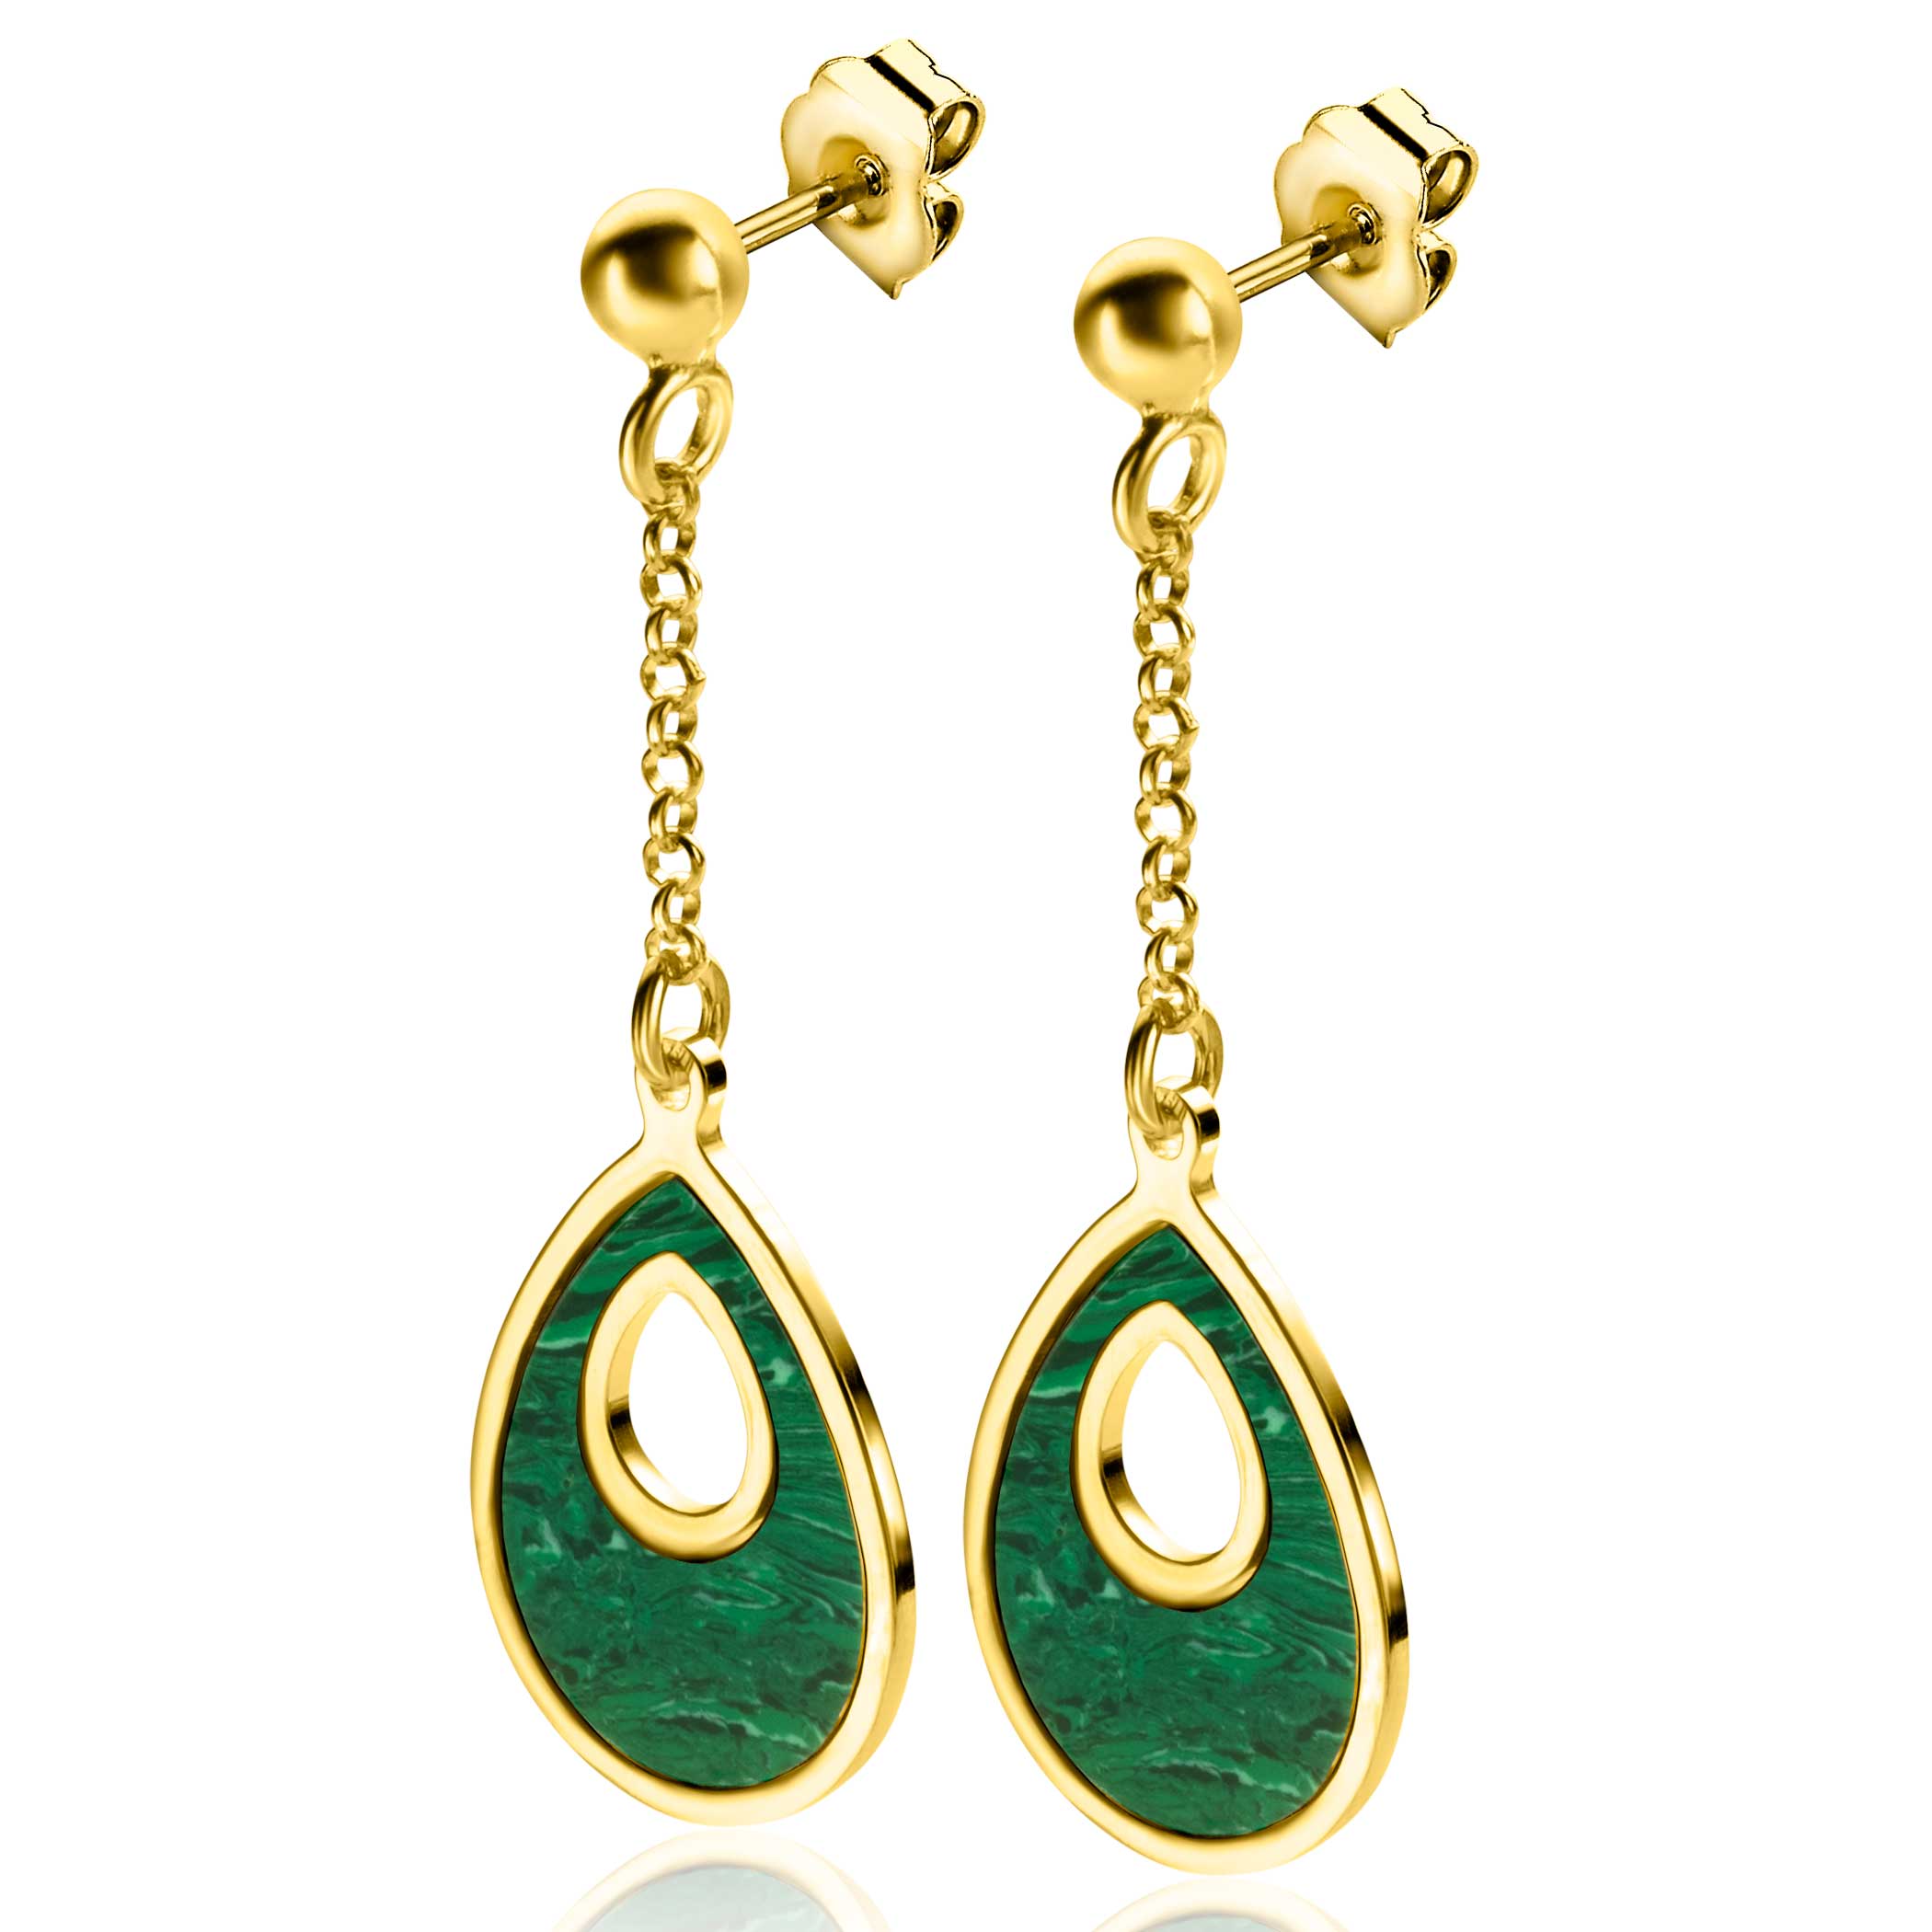 41mm ZINZI Gold Plated Sterling Silver Stud Earrings with Rolo Chain and Green Drop Pendant ZIO-BF64